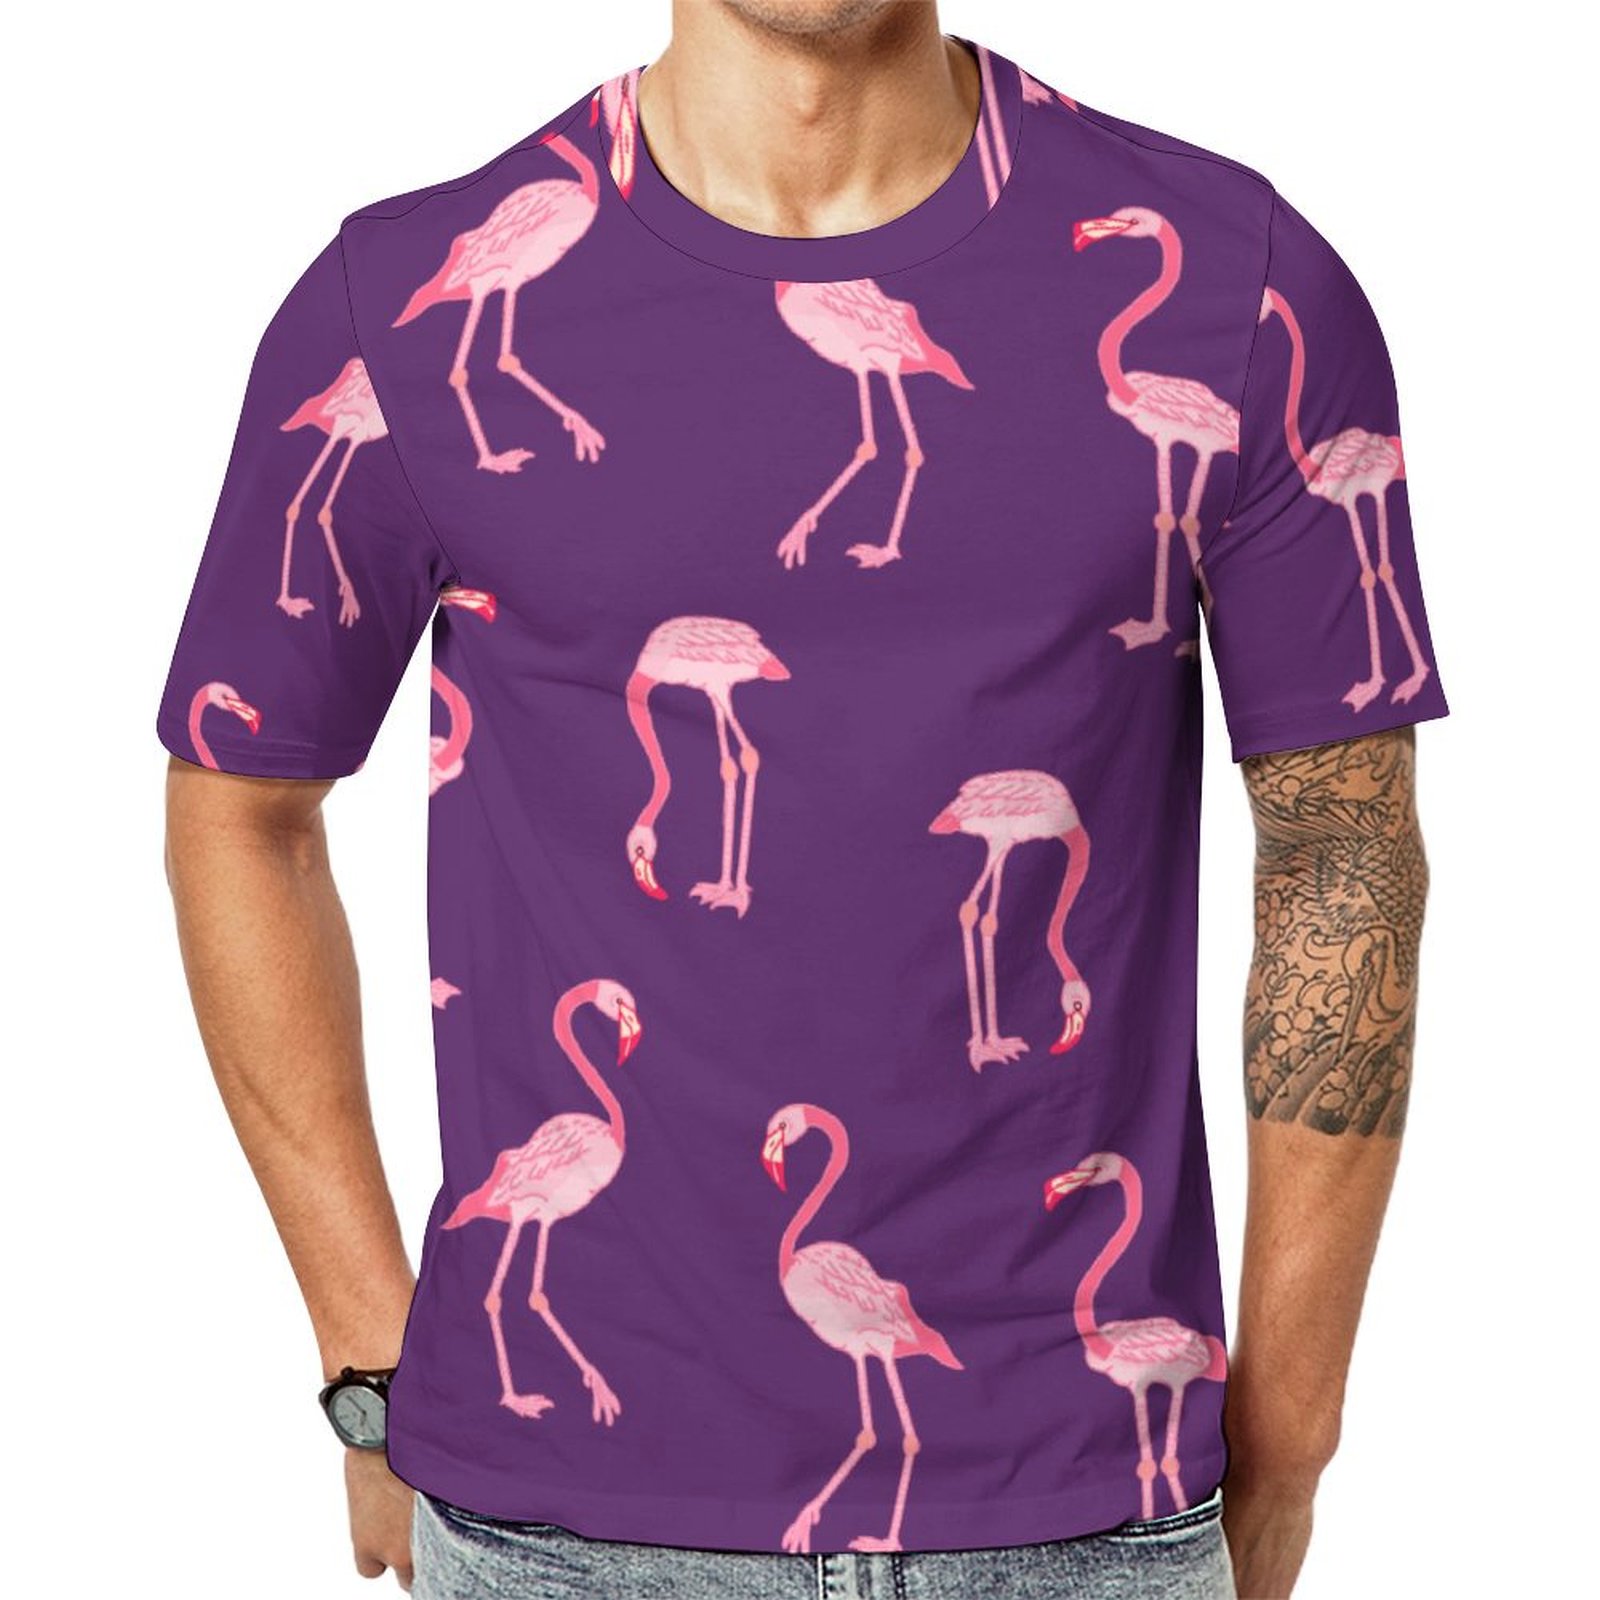 Flamingo Birds Pink And Navy Blue Short Sleeve Print Unisex Tshirt Summer Casual Tees for Men and Women Coolcoshirts